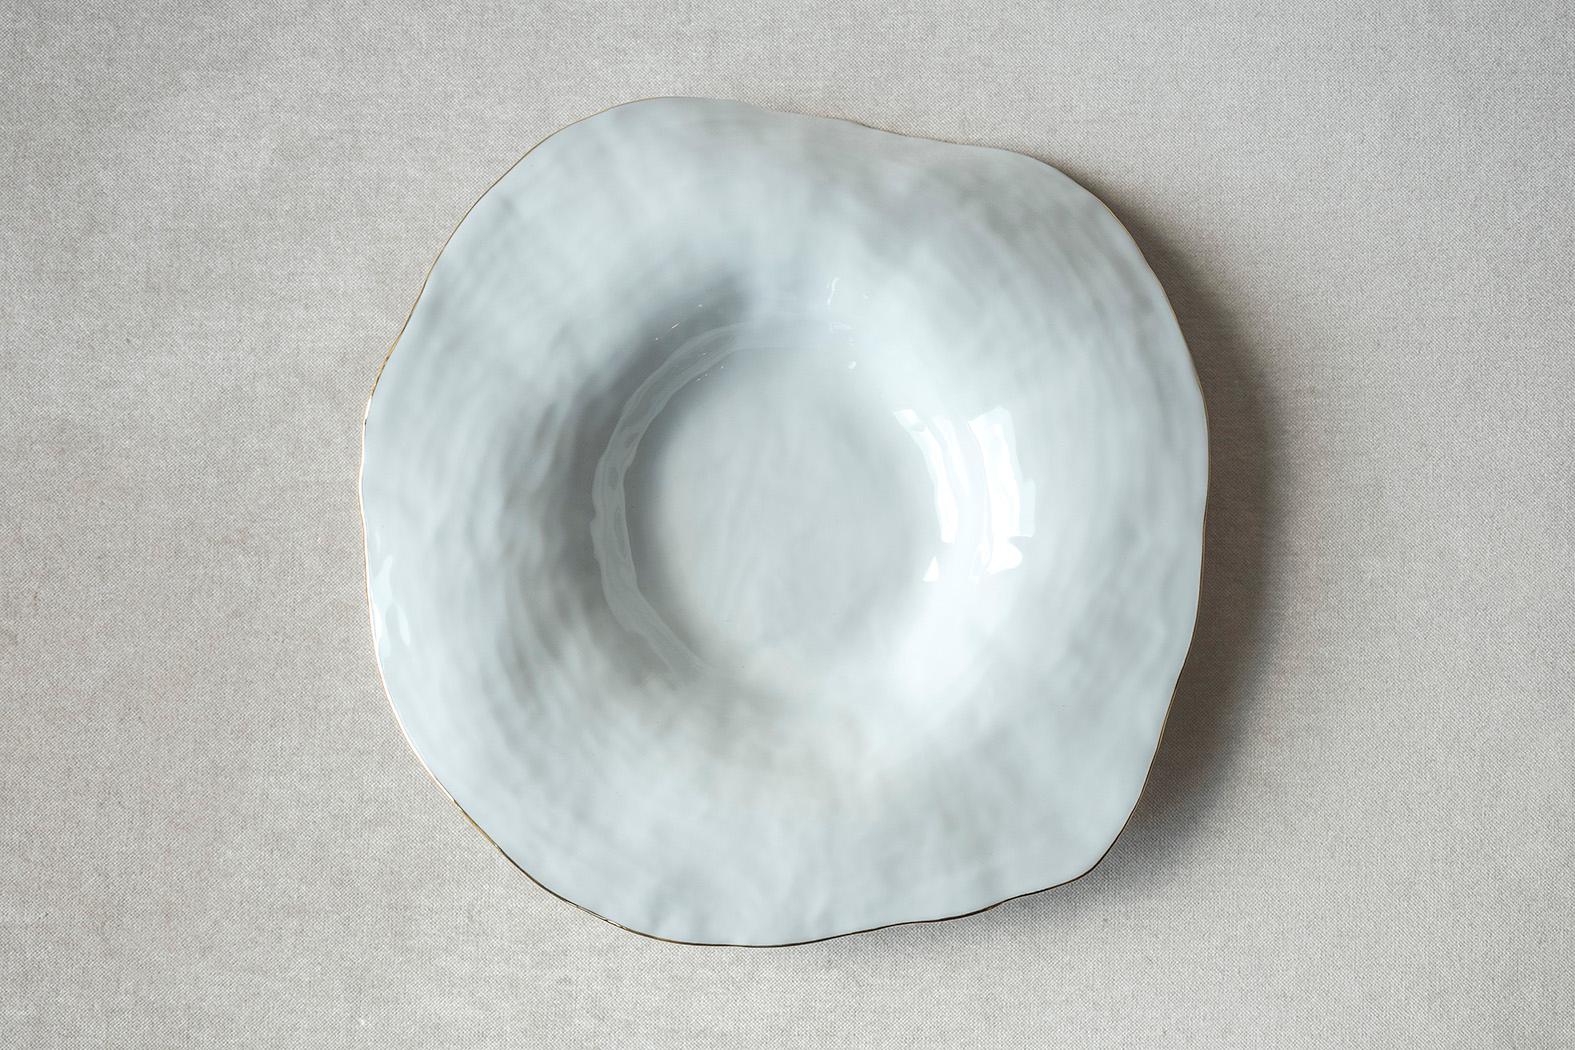 • Large deep dinner plate
• measures 30cm x 30cm x 3,5cm
• perfect for meticulous main dishes
• also works for fancy pasta or chique soup
• glazed white, textured bottom
• with a very luxurious 24k golden rim
• designed in Amsterdam / handmade